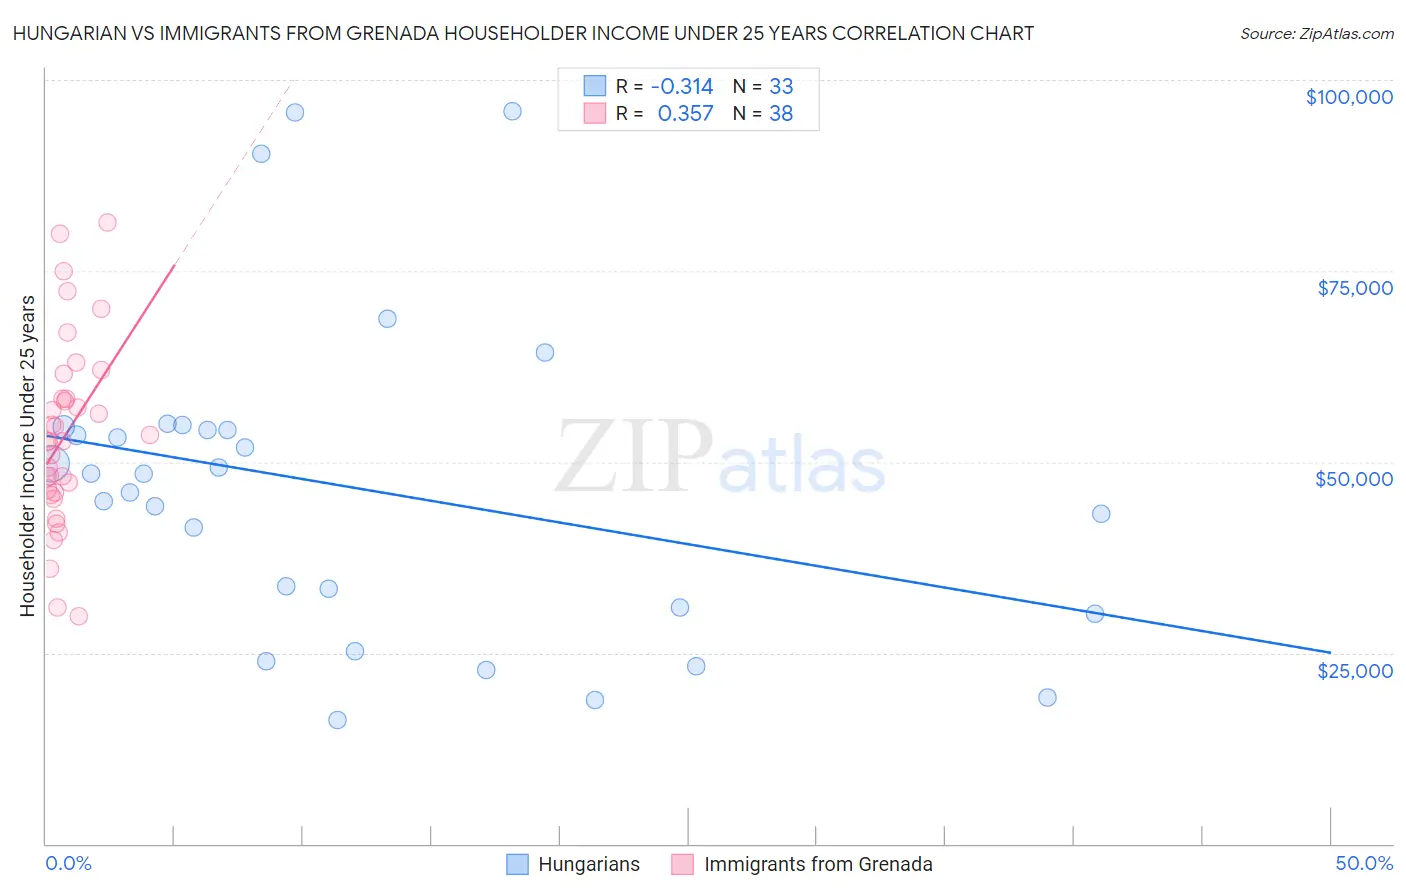 Hungarian vs Immigrants from Grenada Householder Income Under 25 years